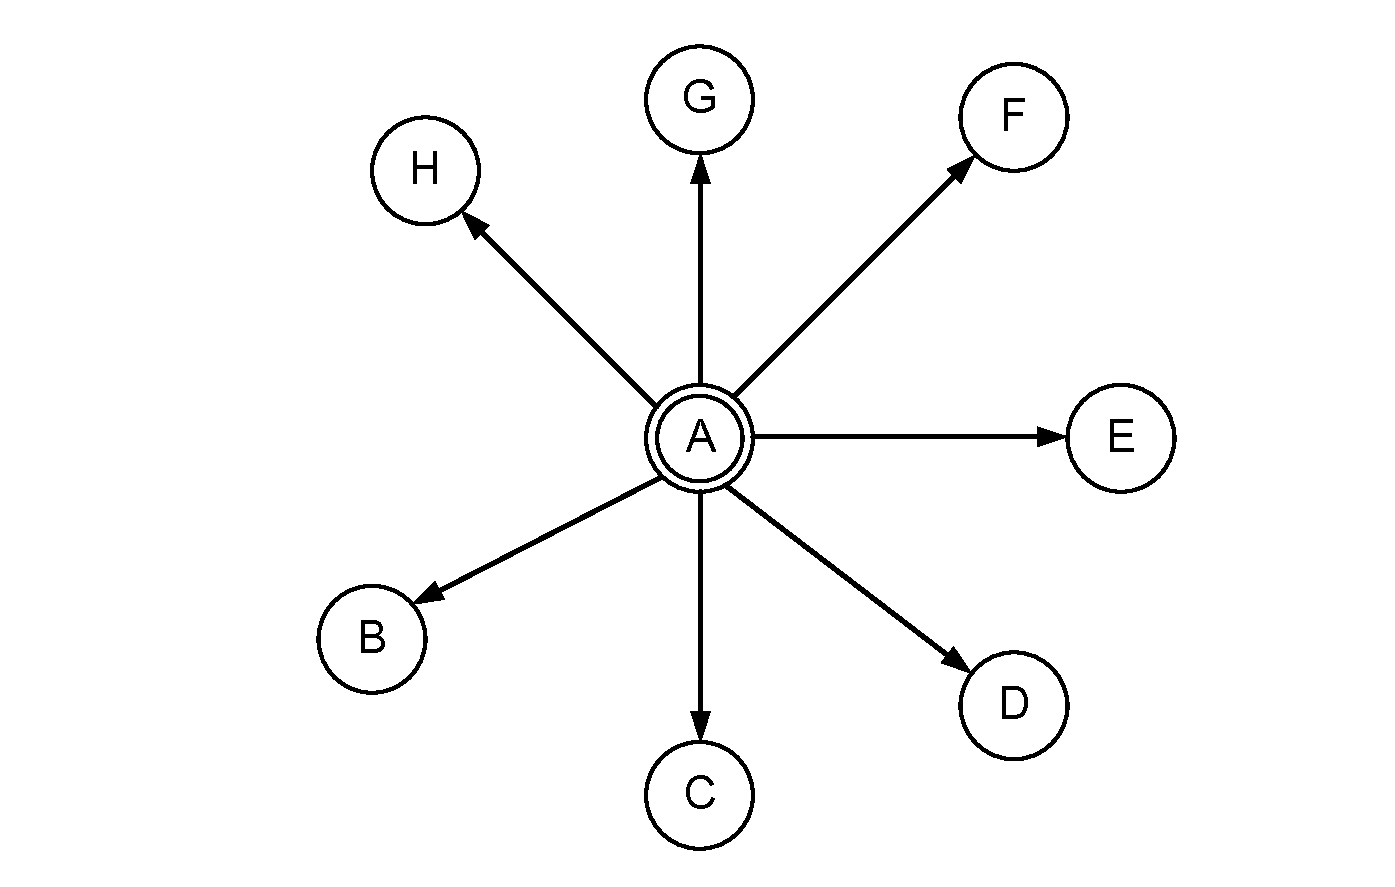 Estimation of information diffusion route on computer mediated communication network